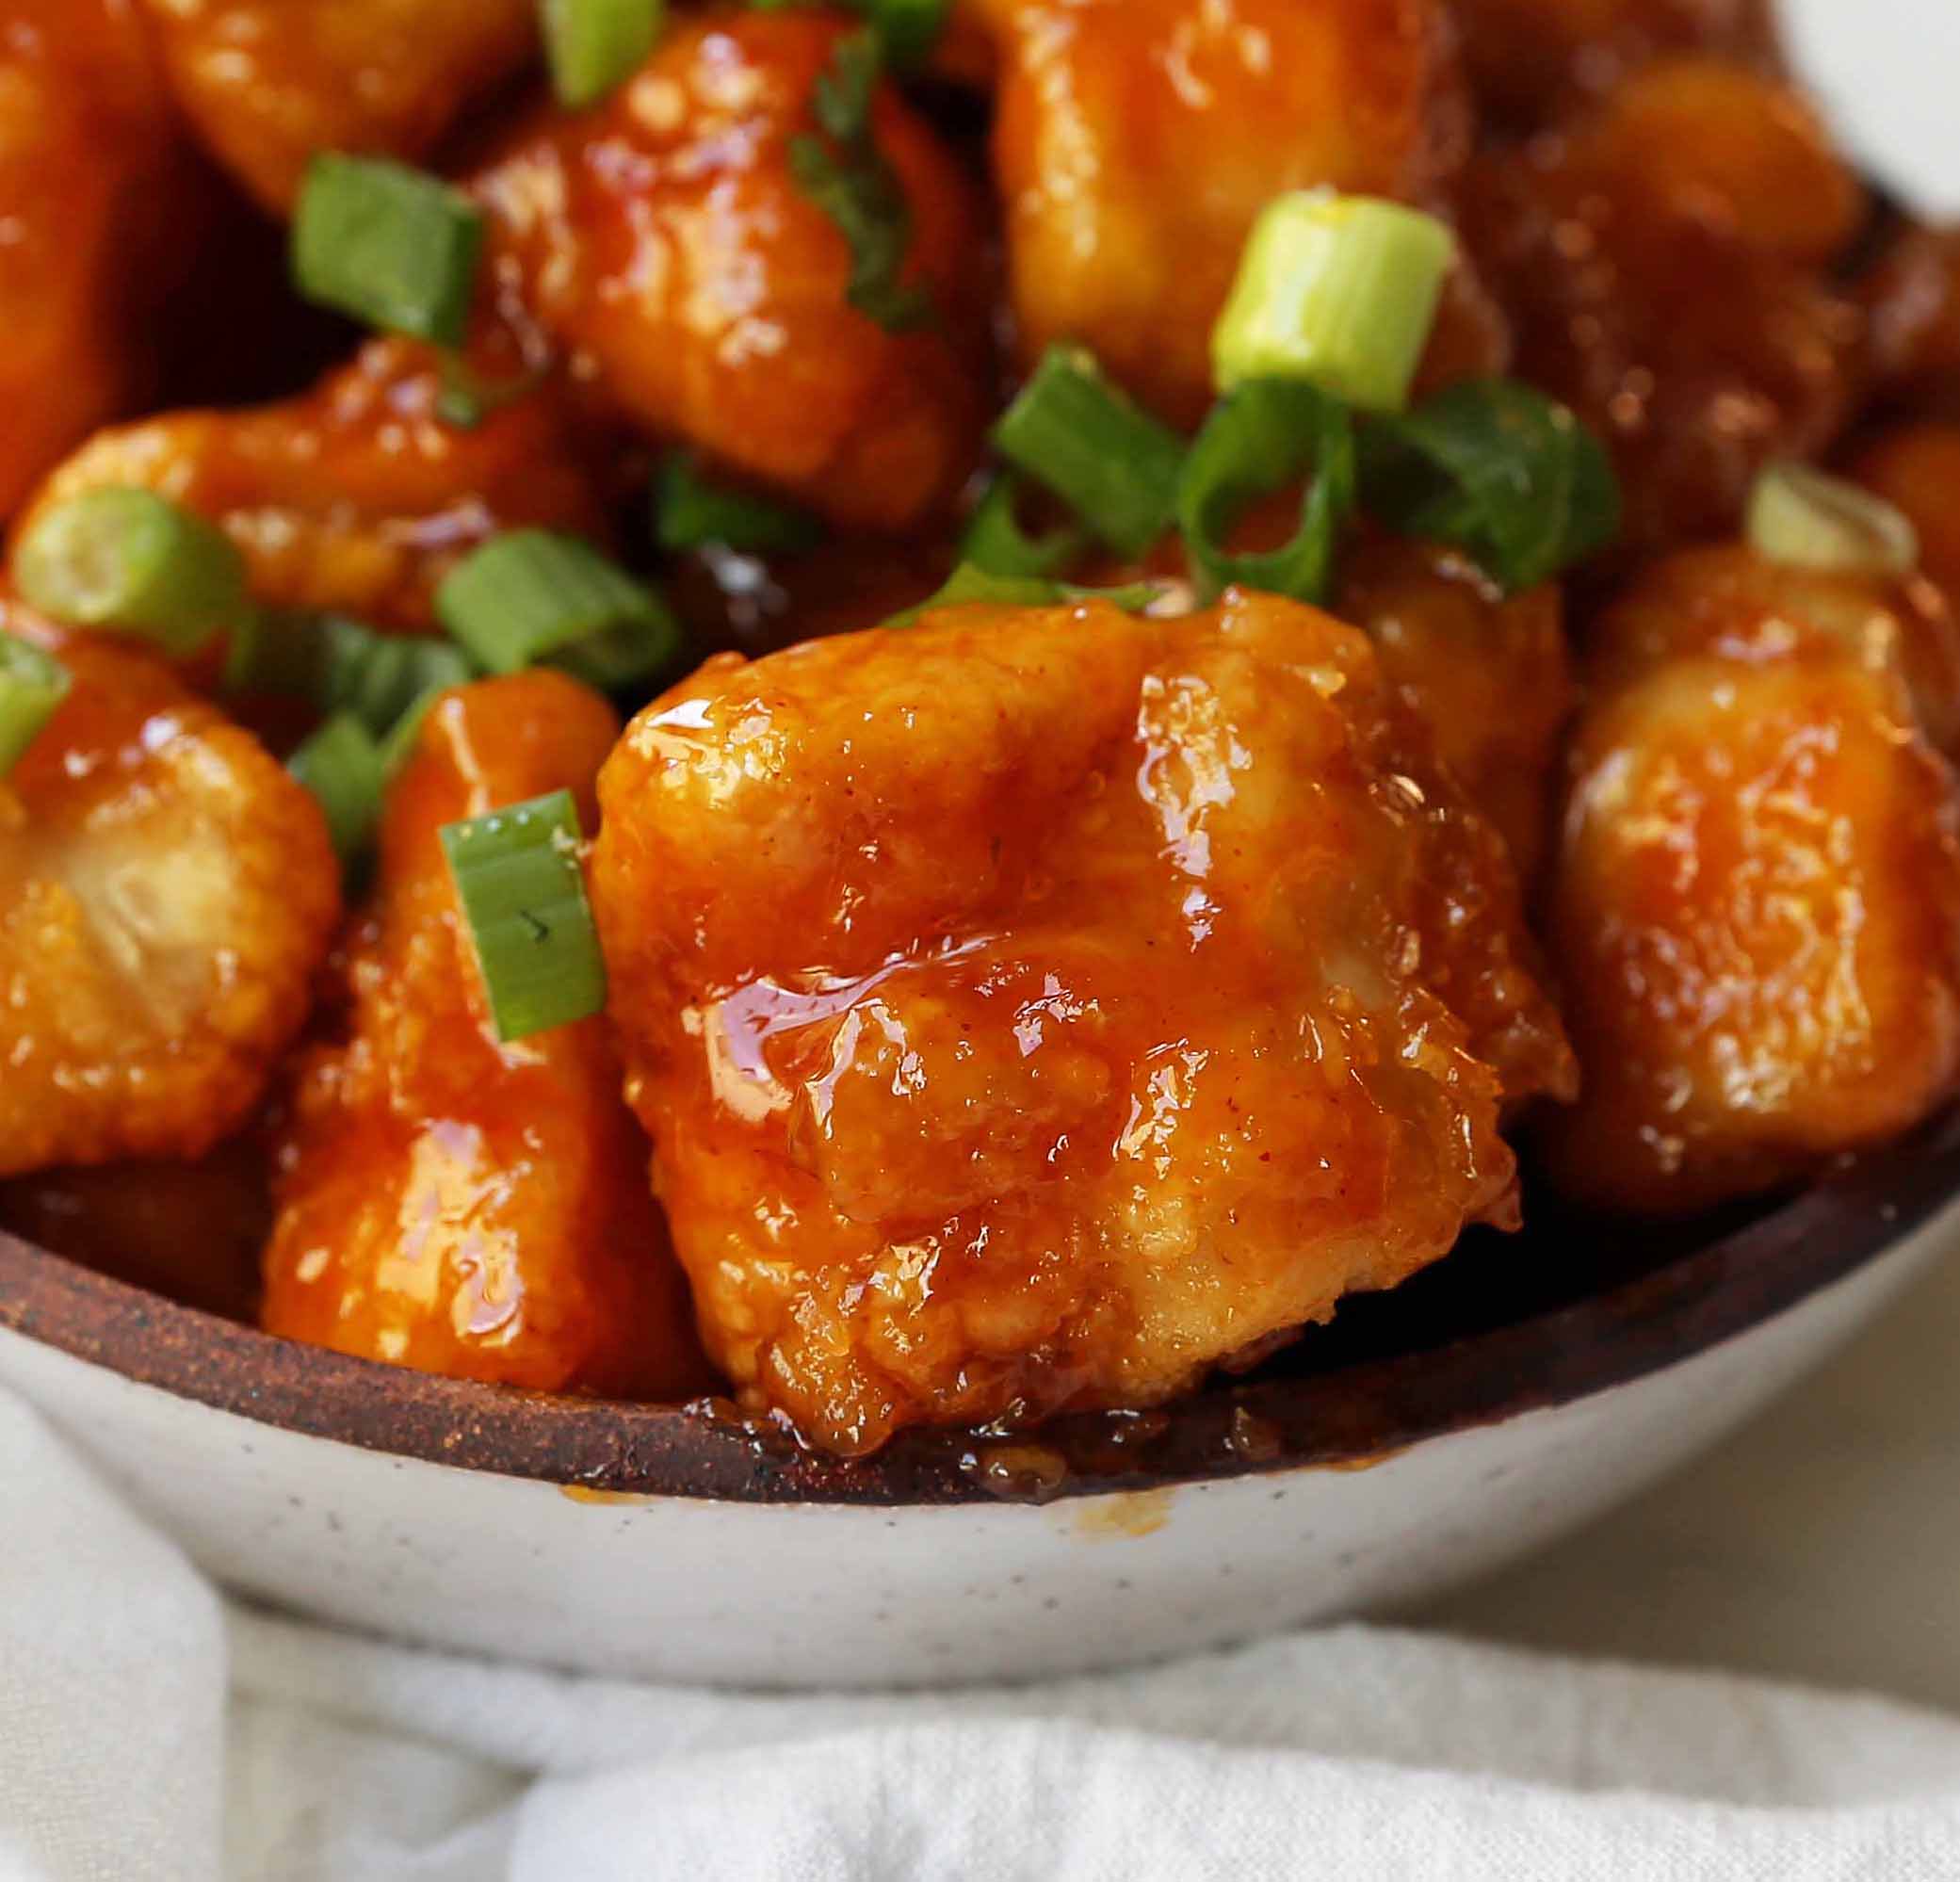 Firecracker Chicken. Sweet and spicy chicken bites made with tender chicken, flash-fried, and baked in a sweet brown sugar buffalo sauce. You'll have people coming back for seconds in no time at all! www.modernhoney.com #firecrackerchicken #buffalochicken #chicken #chickenbites 